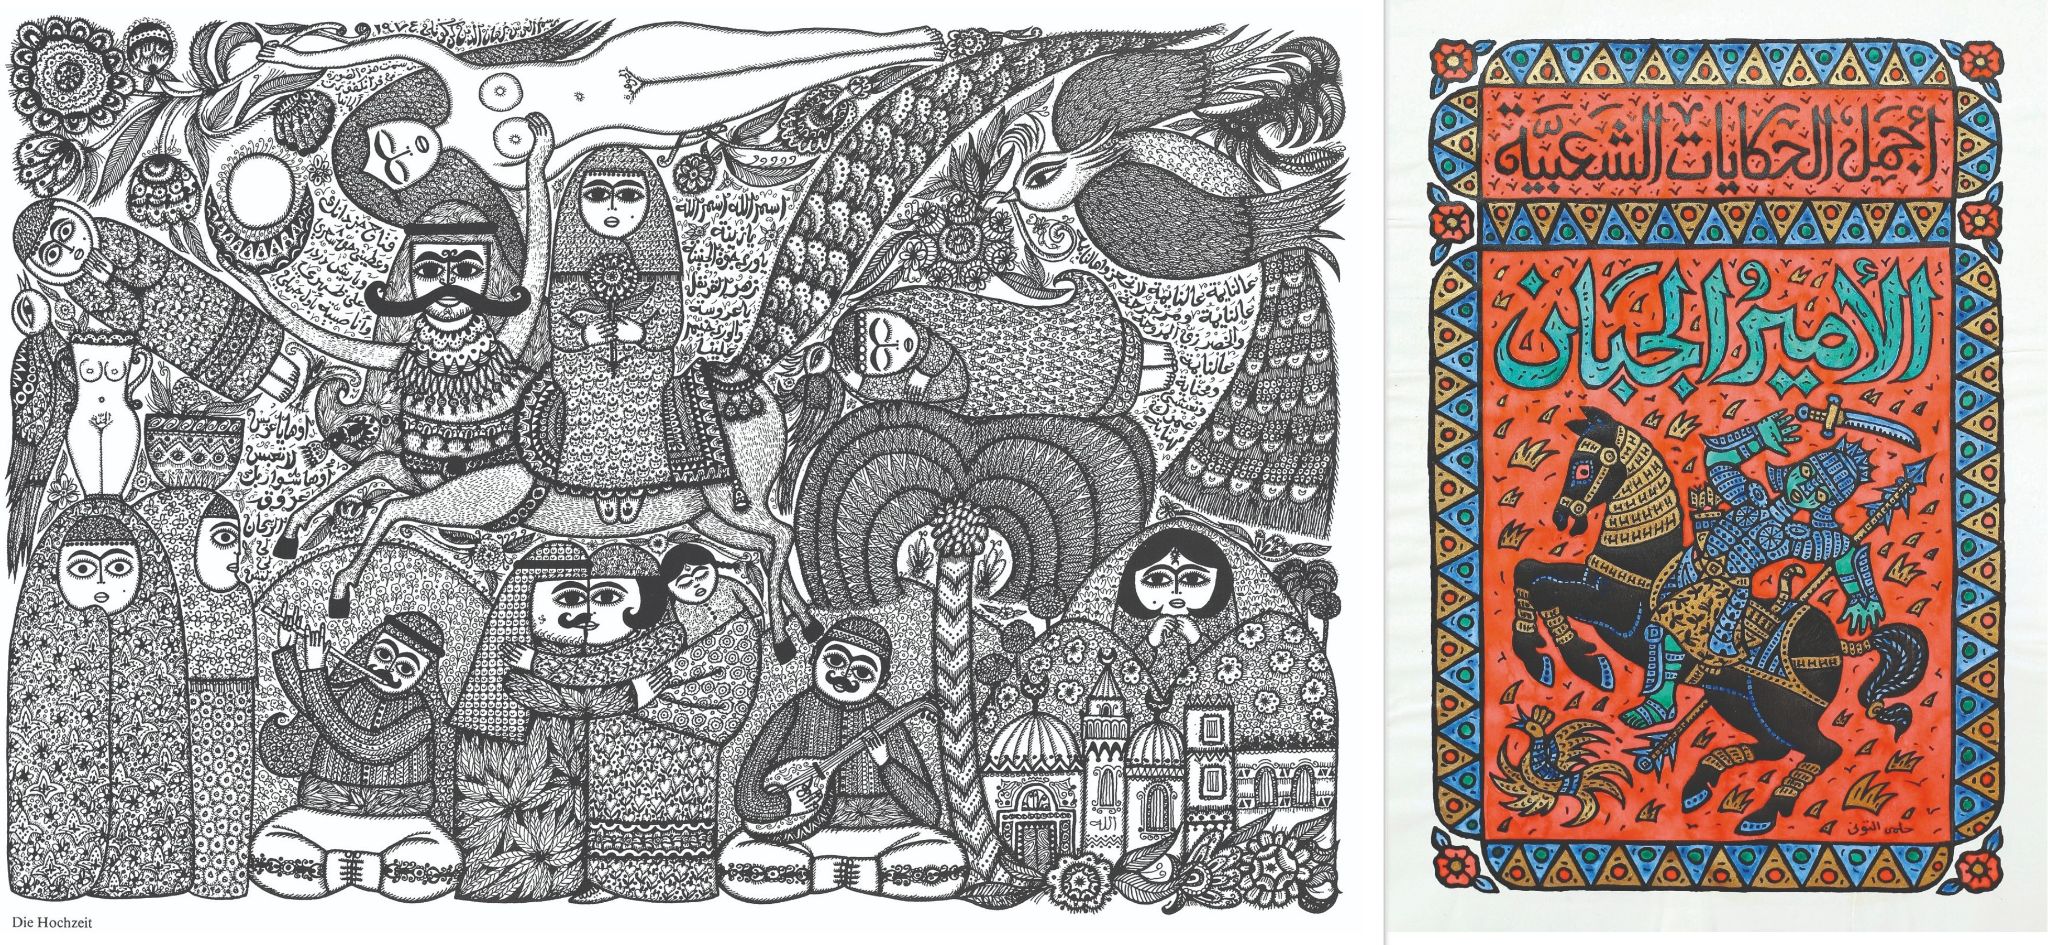 In Burhan Karkutli’s work in the 1970s, and Hilmi El-Touni’s iconic book covers of the 1990s, we see the same vernacular, folkloric style. 